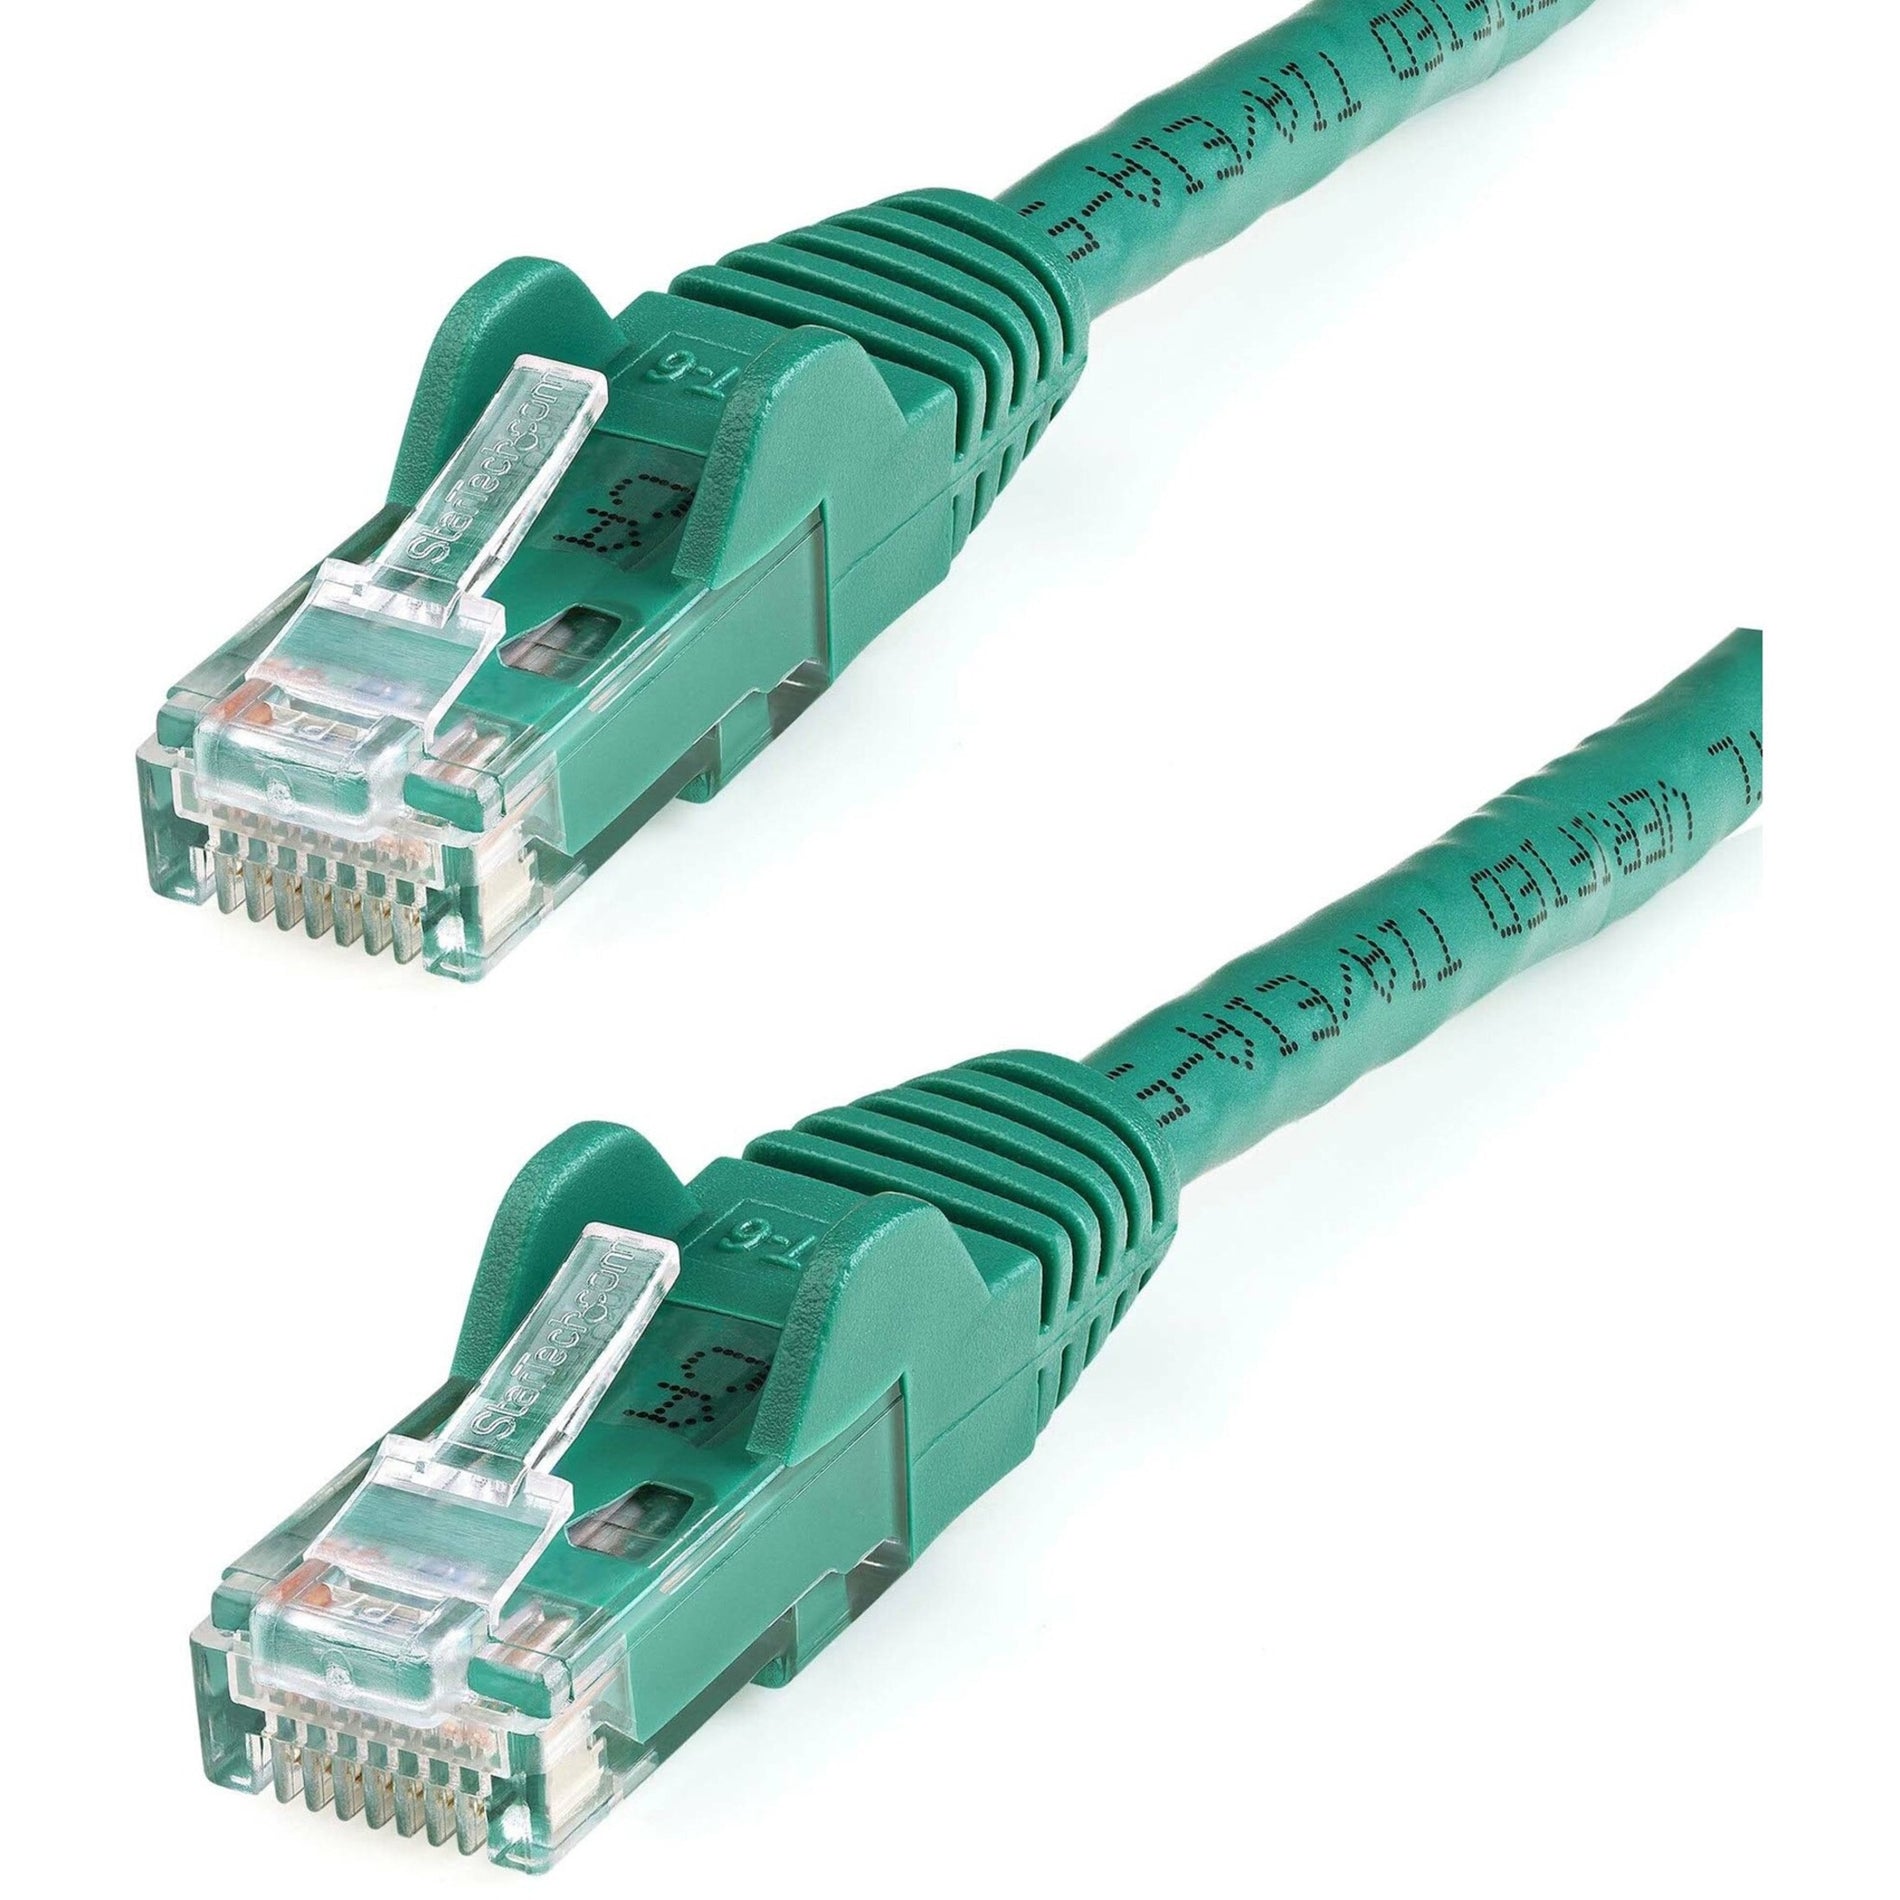 StarTech.com N6PATCH14GN Cat6 Patch Cable, 14ft Green Ethernet Cable, Snagless RJ45 Connectors